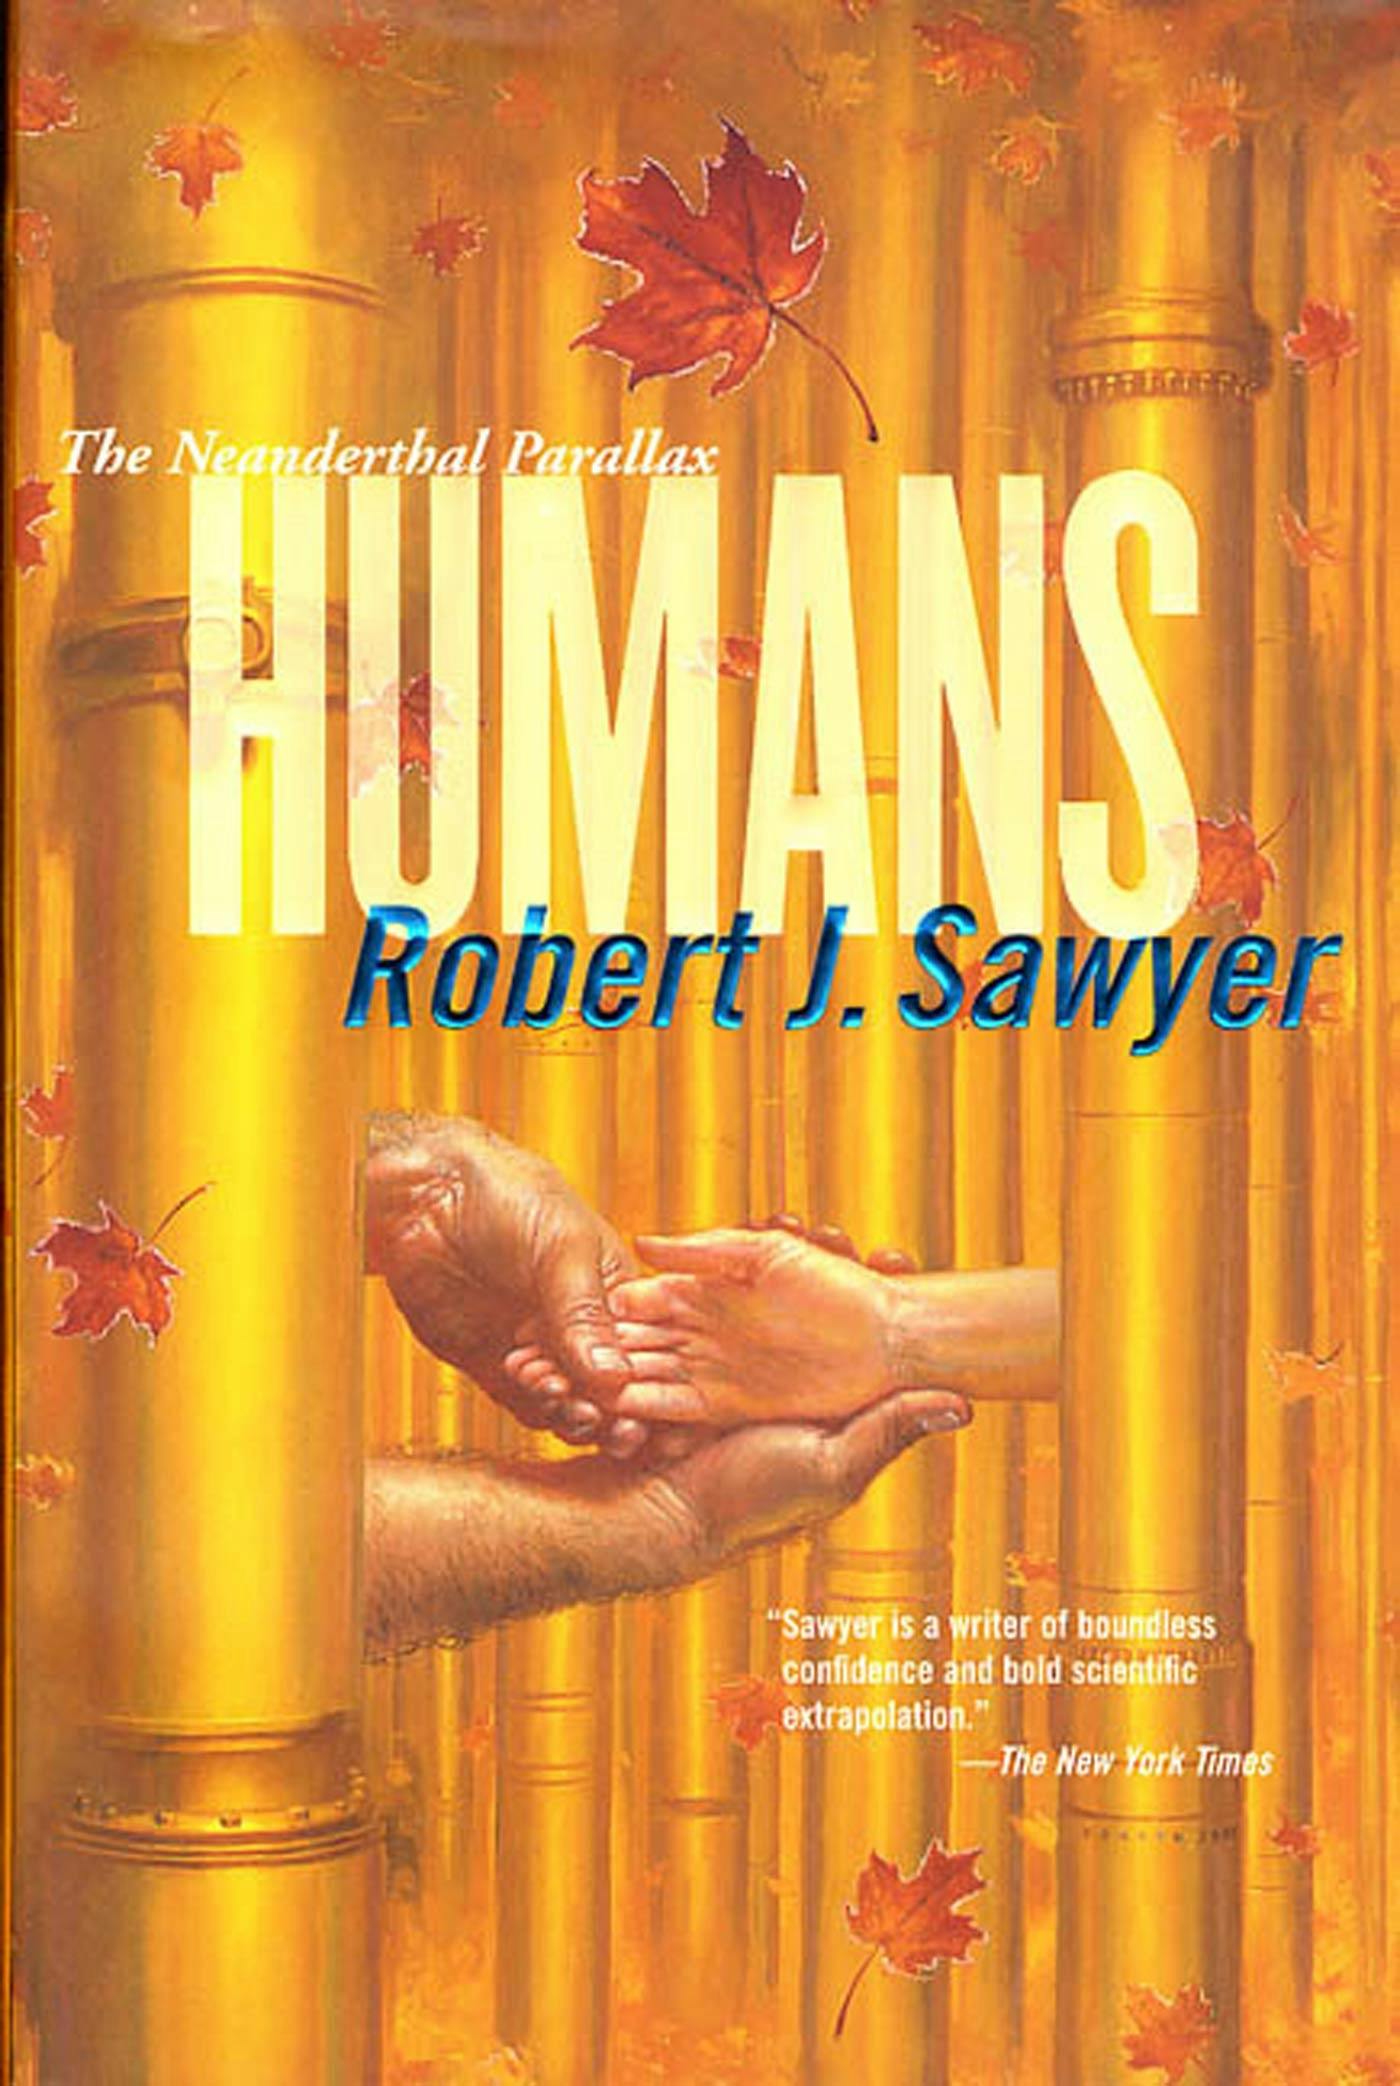 Cover for the book titled as: Humans